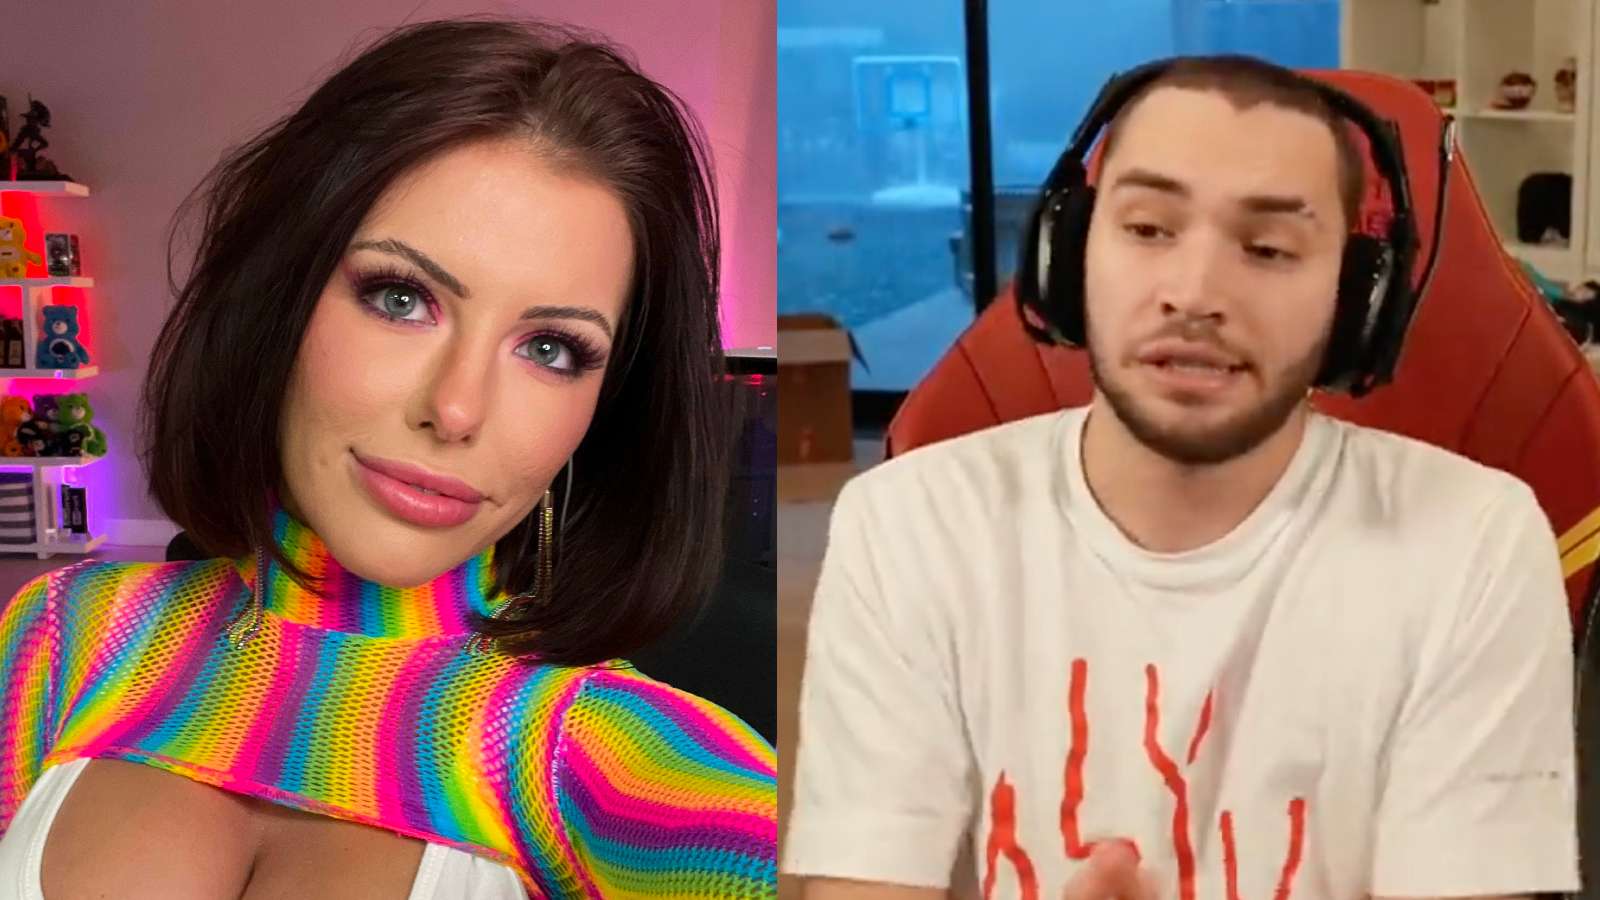 Adriana Chechik Slams Adin Ross Over Call To Ban Twitch Hot Tub Streams “most Disrespectful 